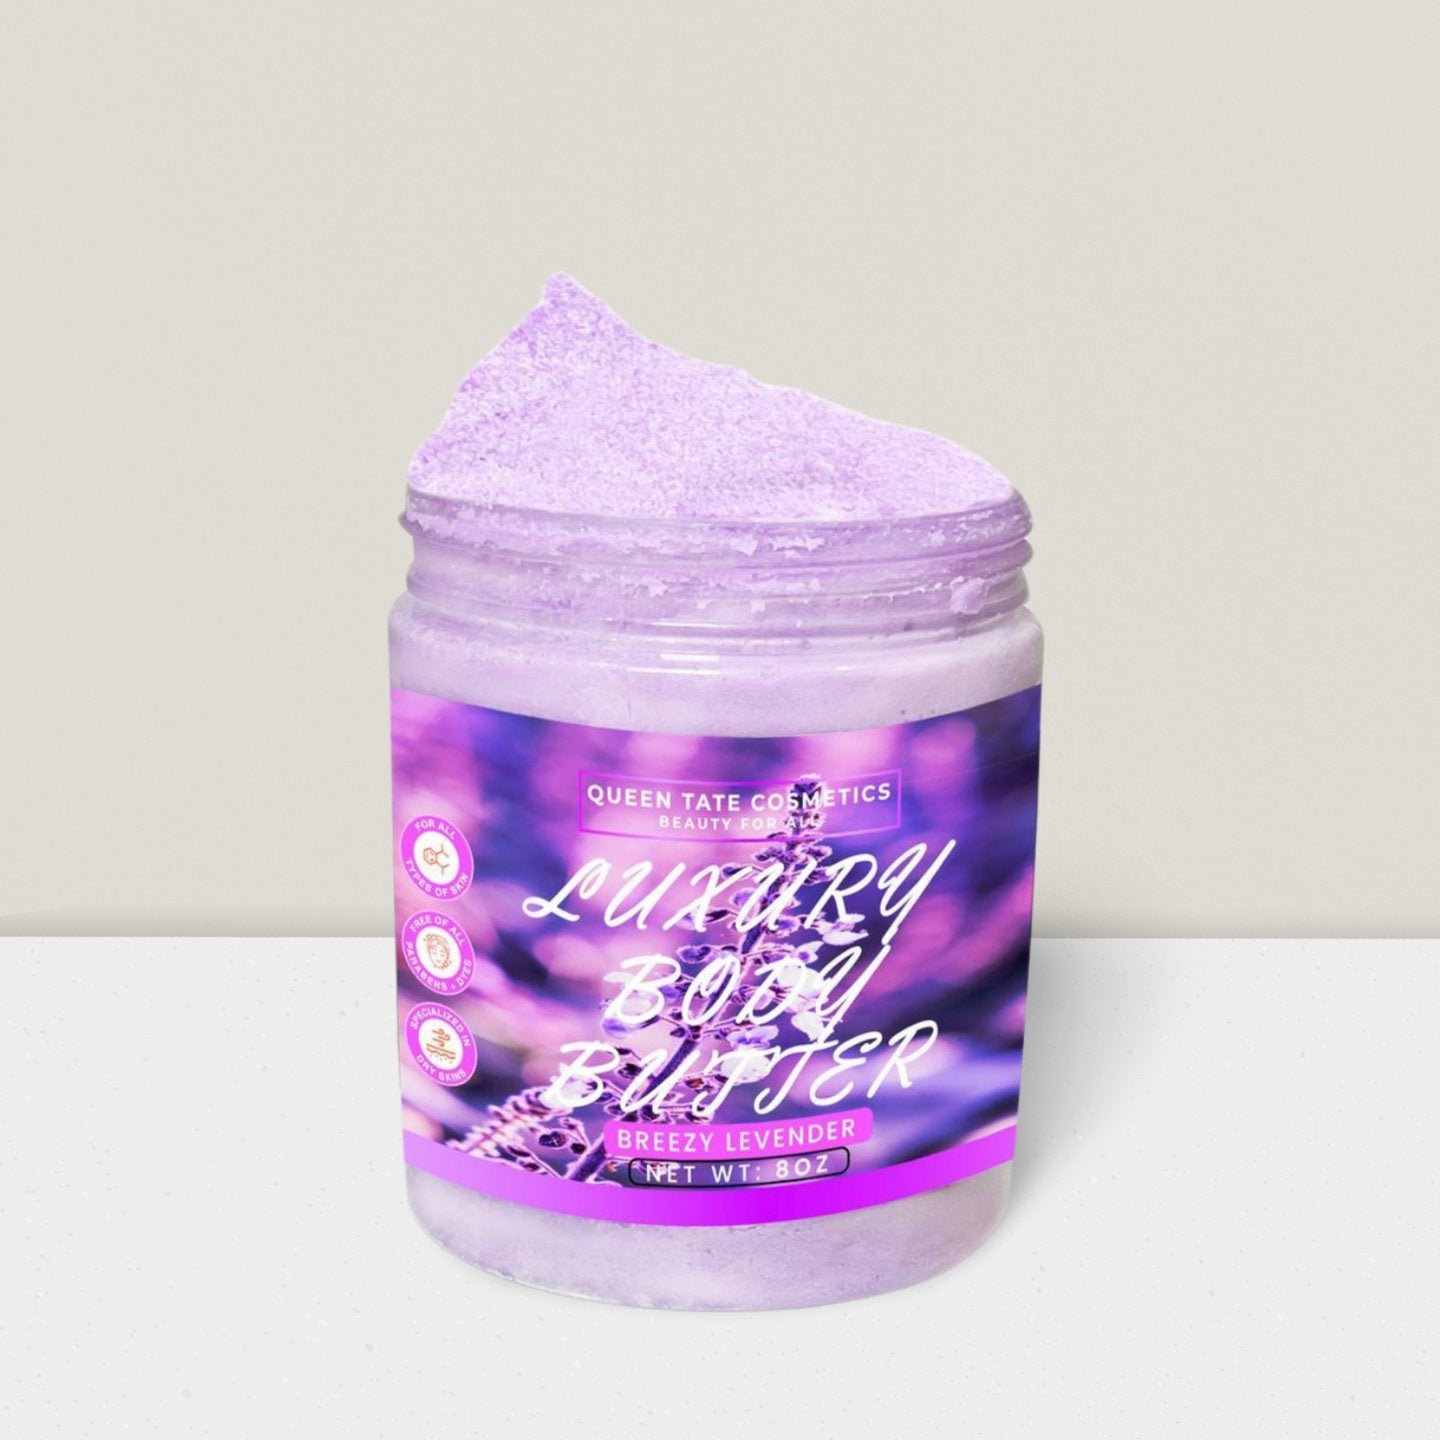 Breezy Lavender-Handcrafted Body Butter - Queen Tate CosmeticsHandcrafted Luxury Body ButterBreezy Lavender-Handcrafted Body ButterHandcrafted Luxury Body ButterQueen Tate Cosmetics 8 oz